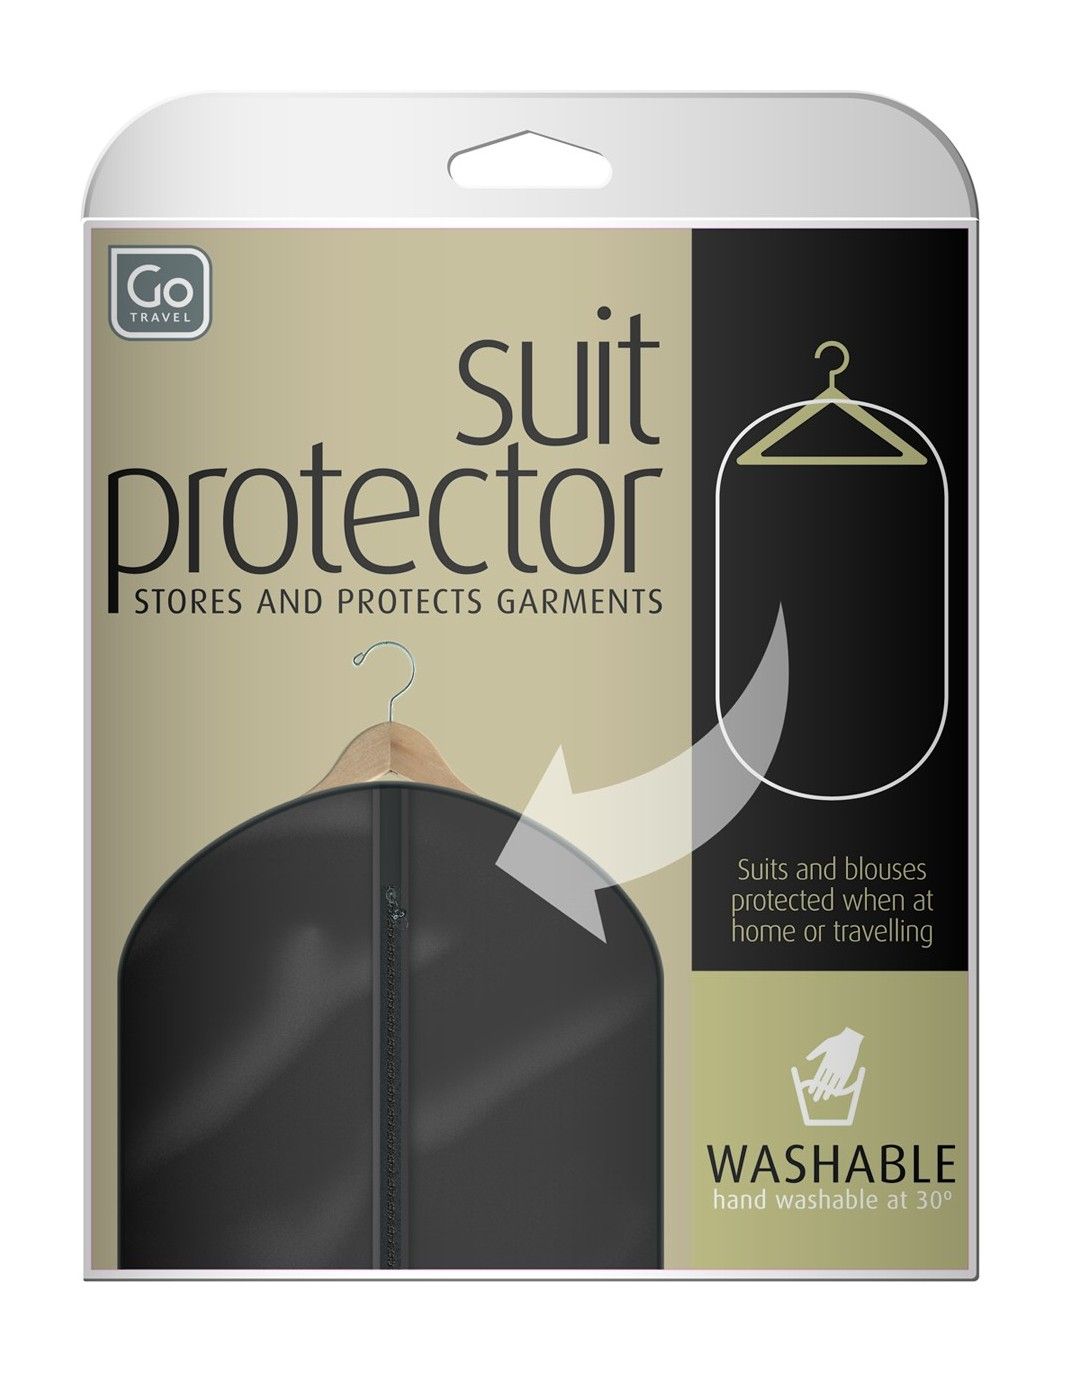 Go Travel Suit Protector